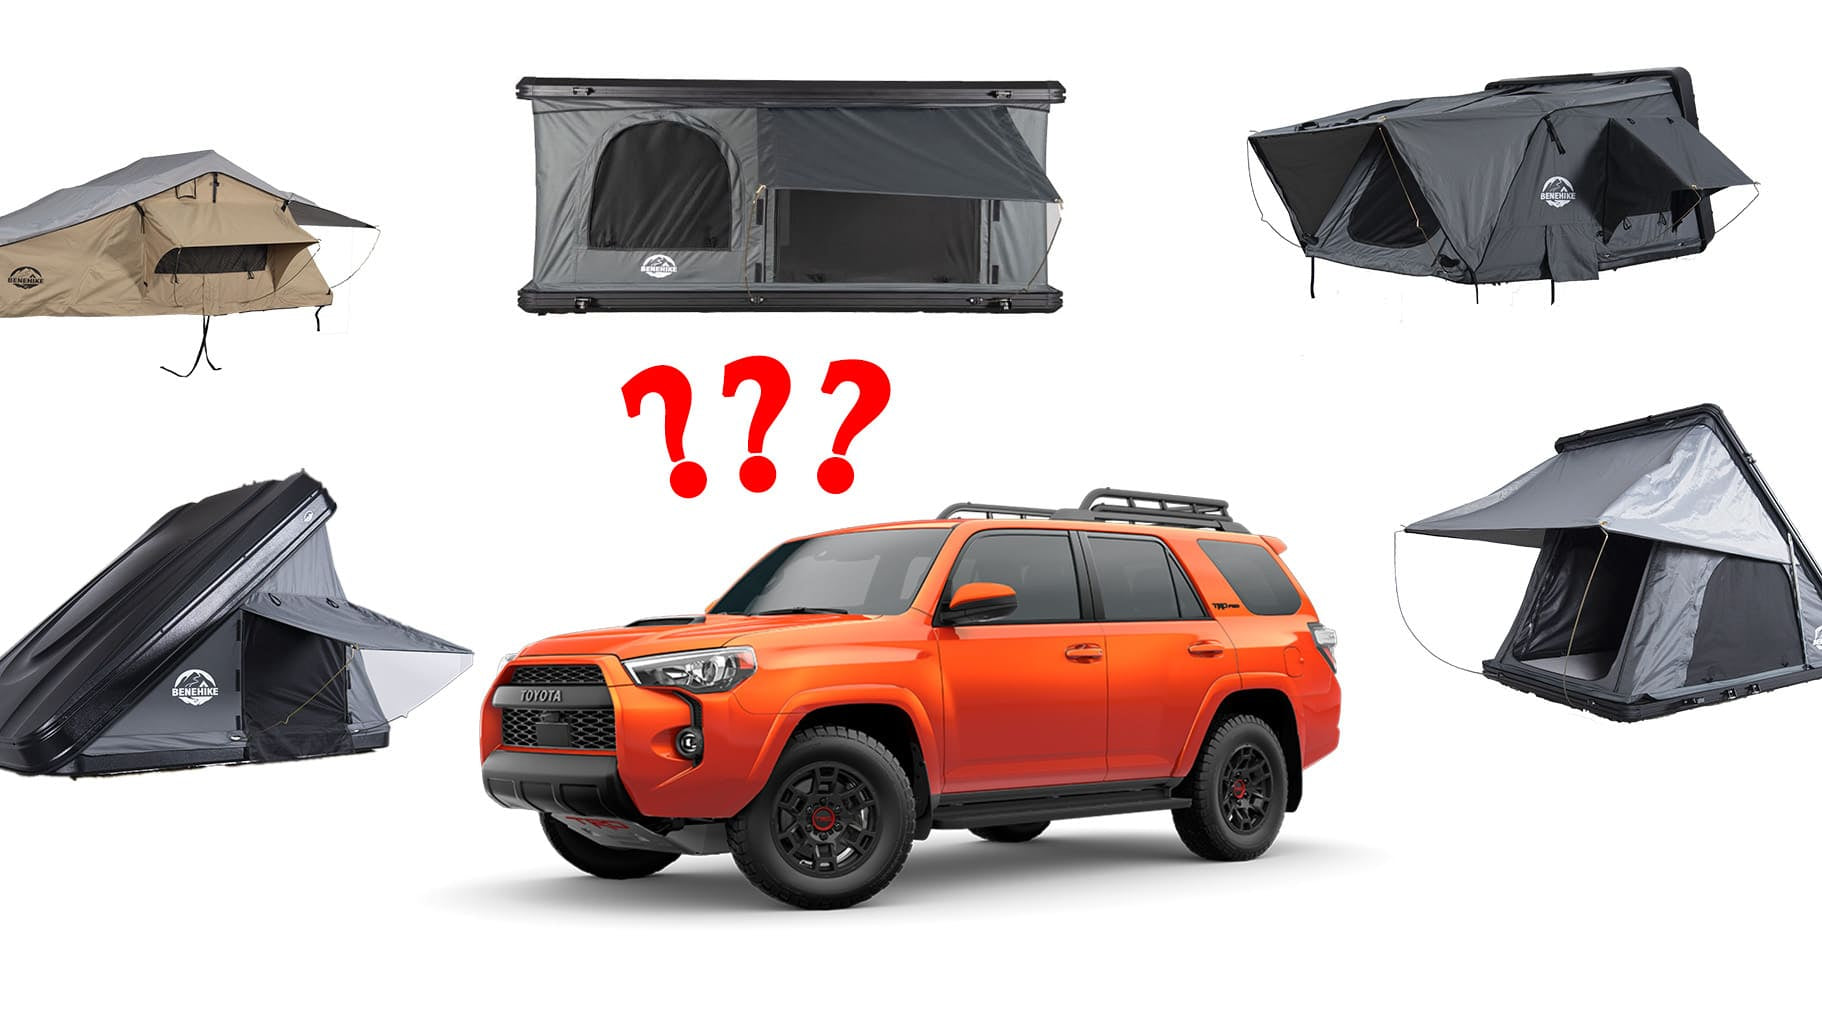 How Do I Know If A Roof Top Tent Can Fit My Car?